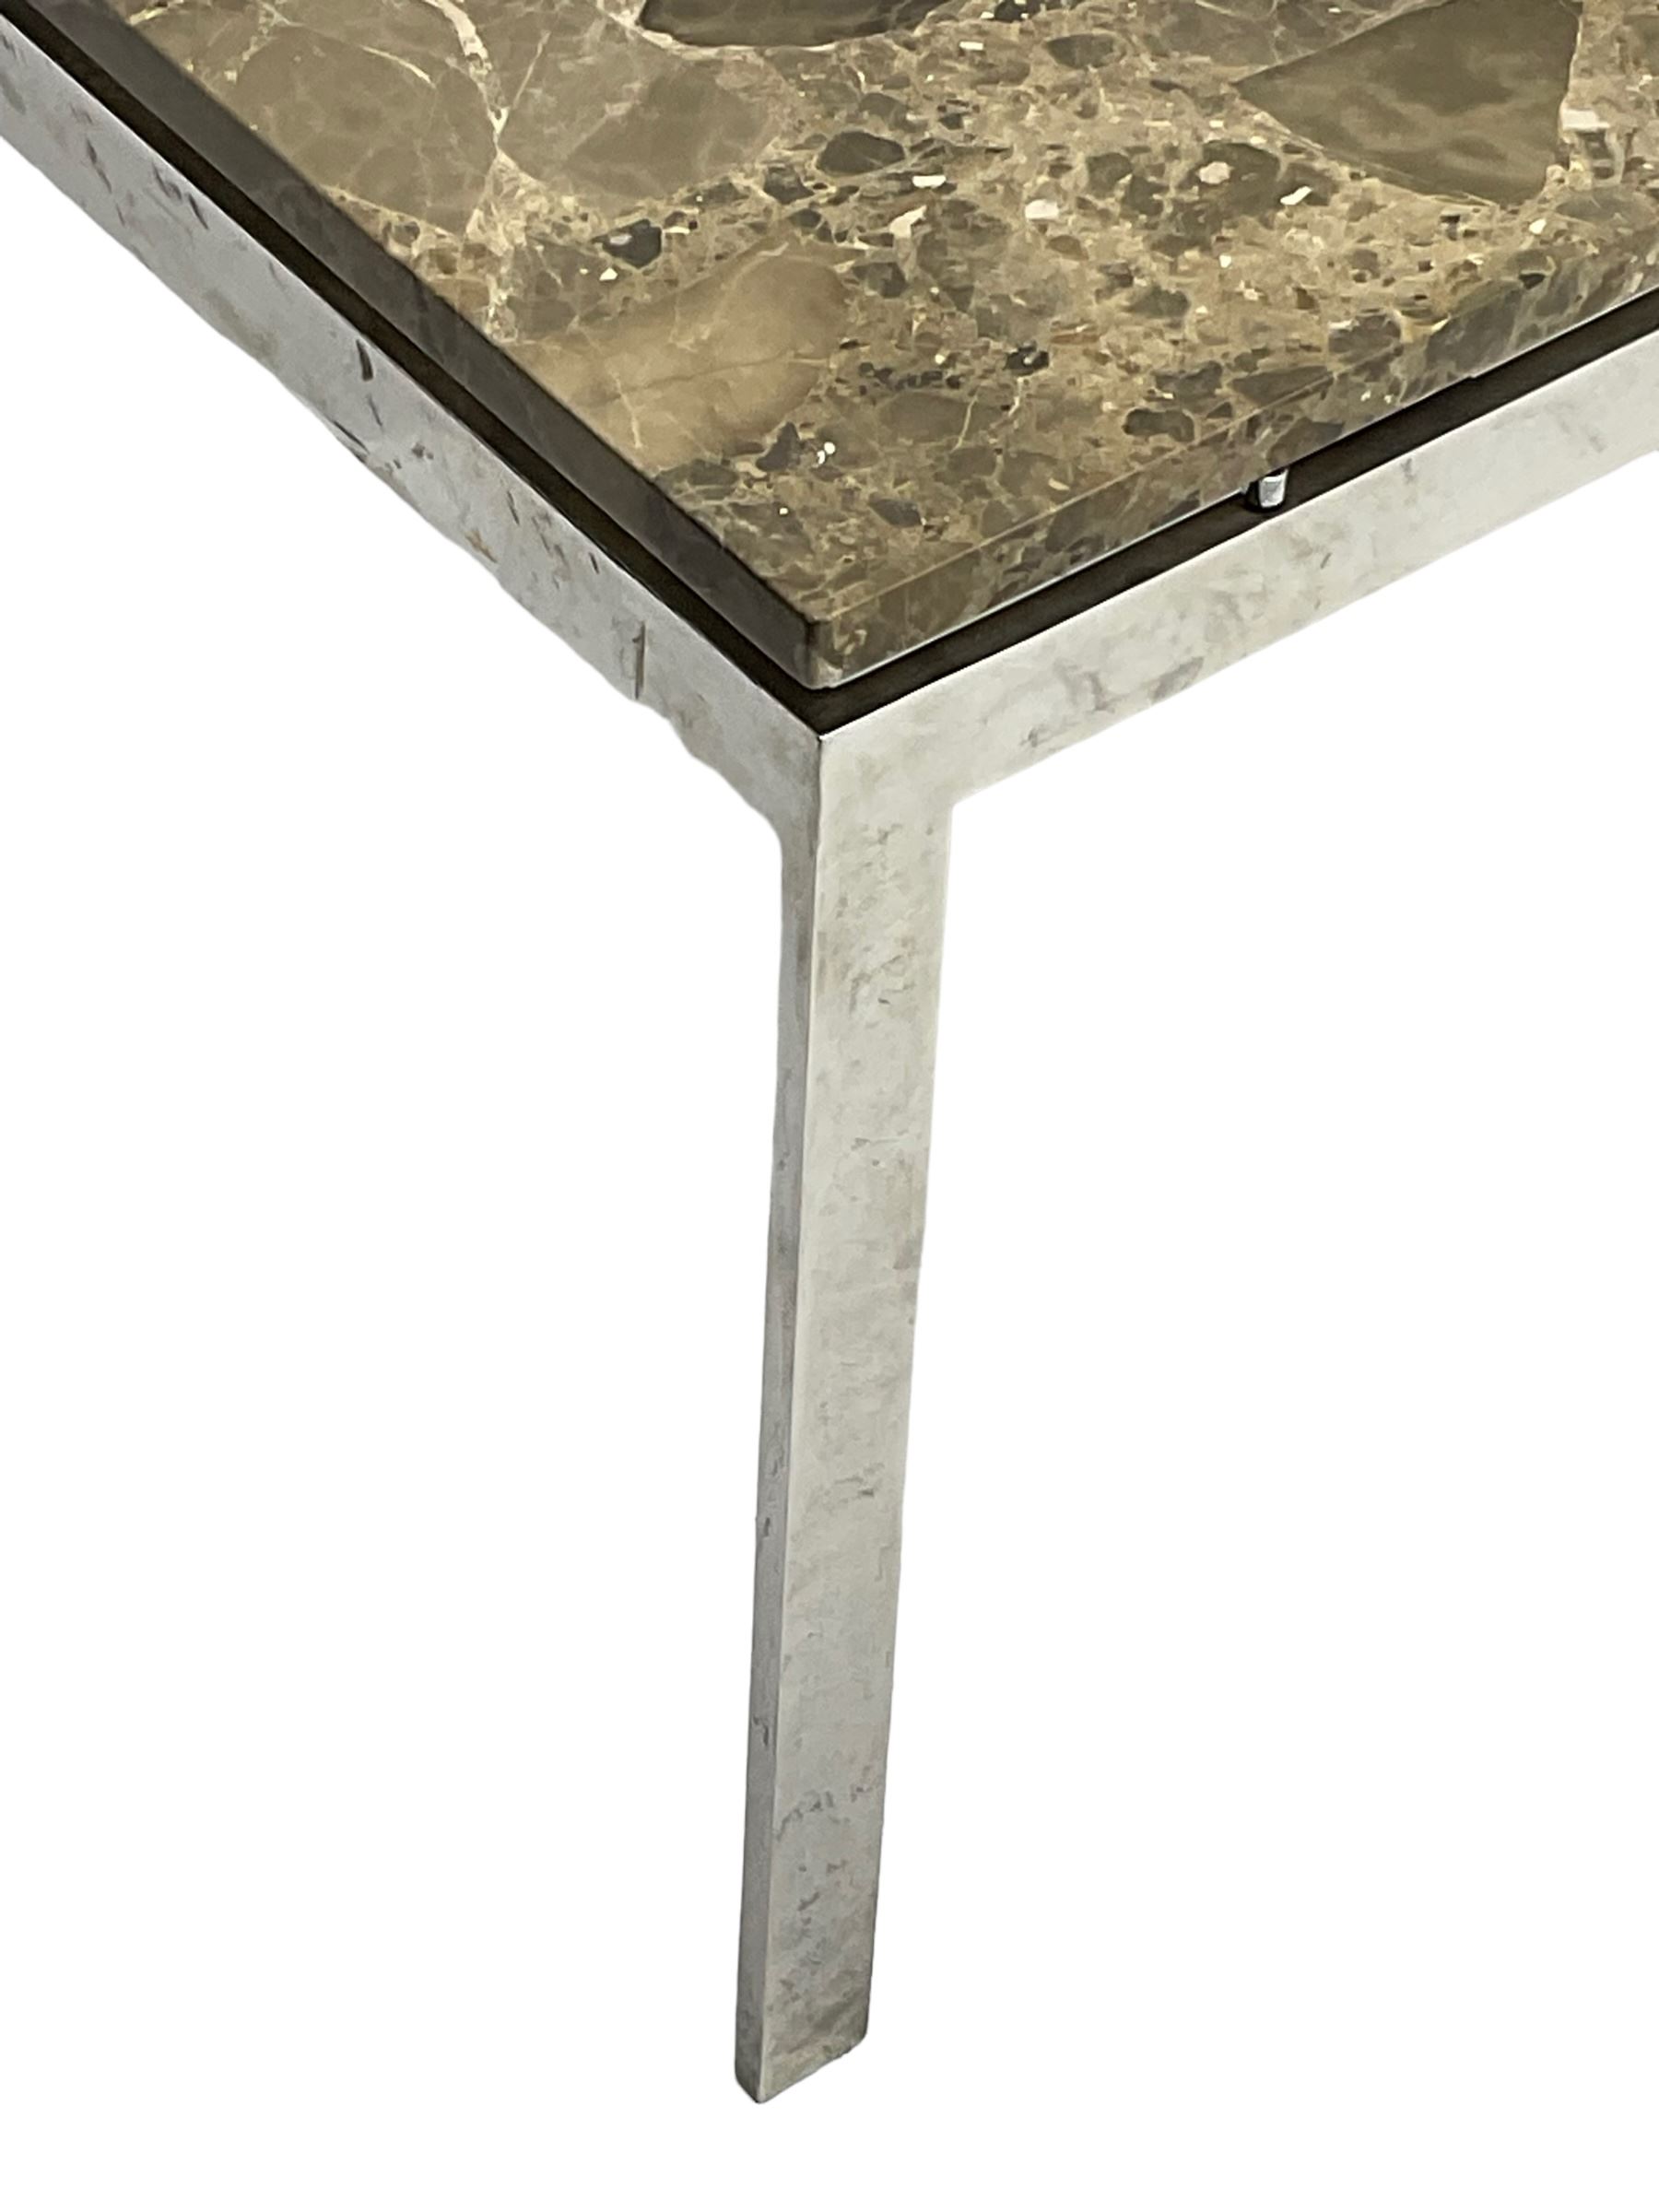 Mid-to-late 20th century marble and metal coffee table - Image 5 of 7